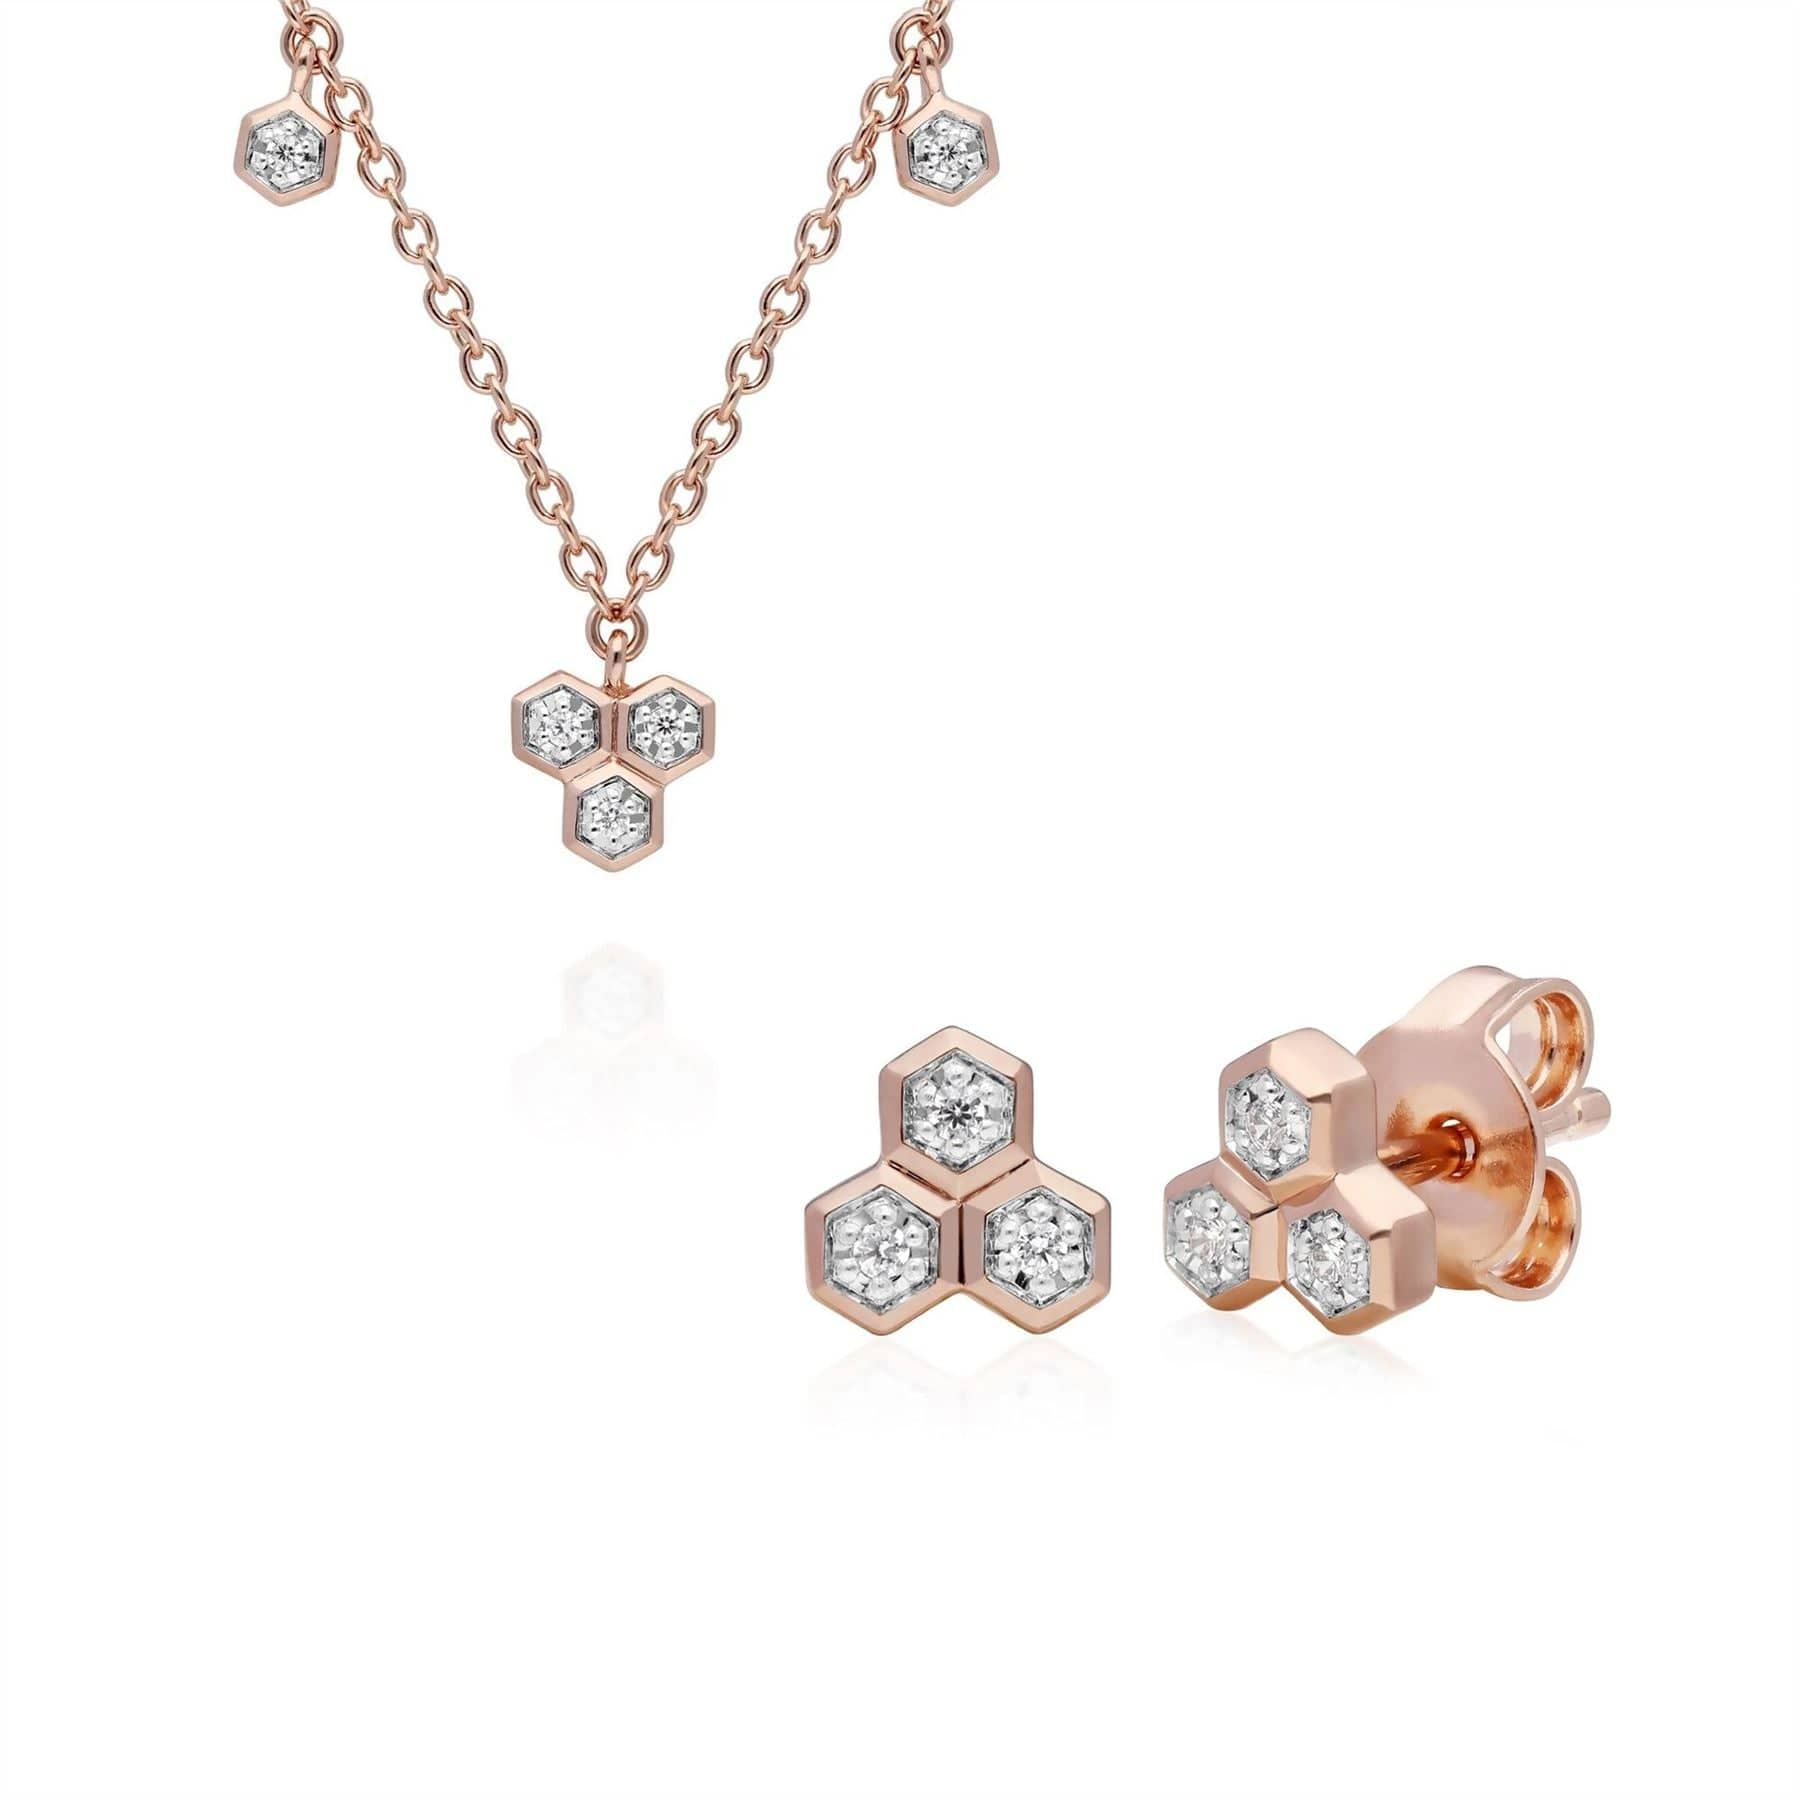 191N0227029-191E0394029 Diamond Trilogy Necklace & Stud Earring Set in 9ct Rose Gold 1